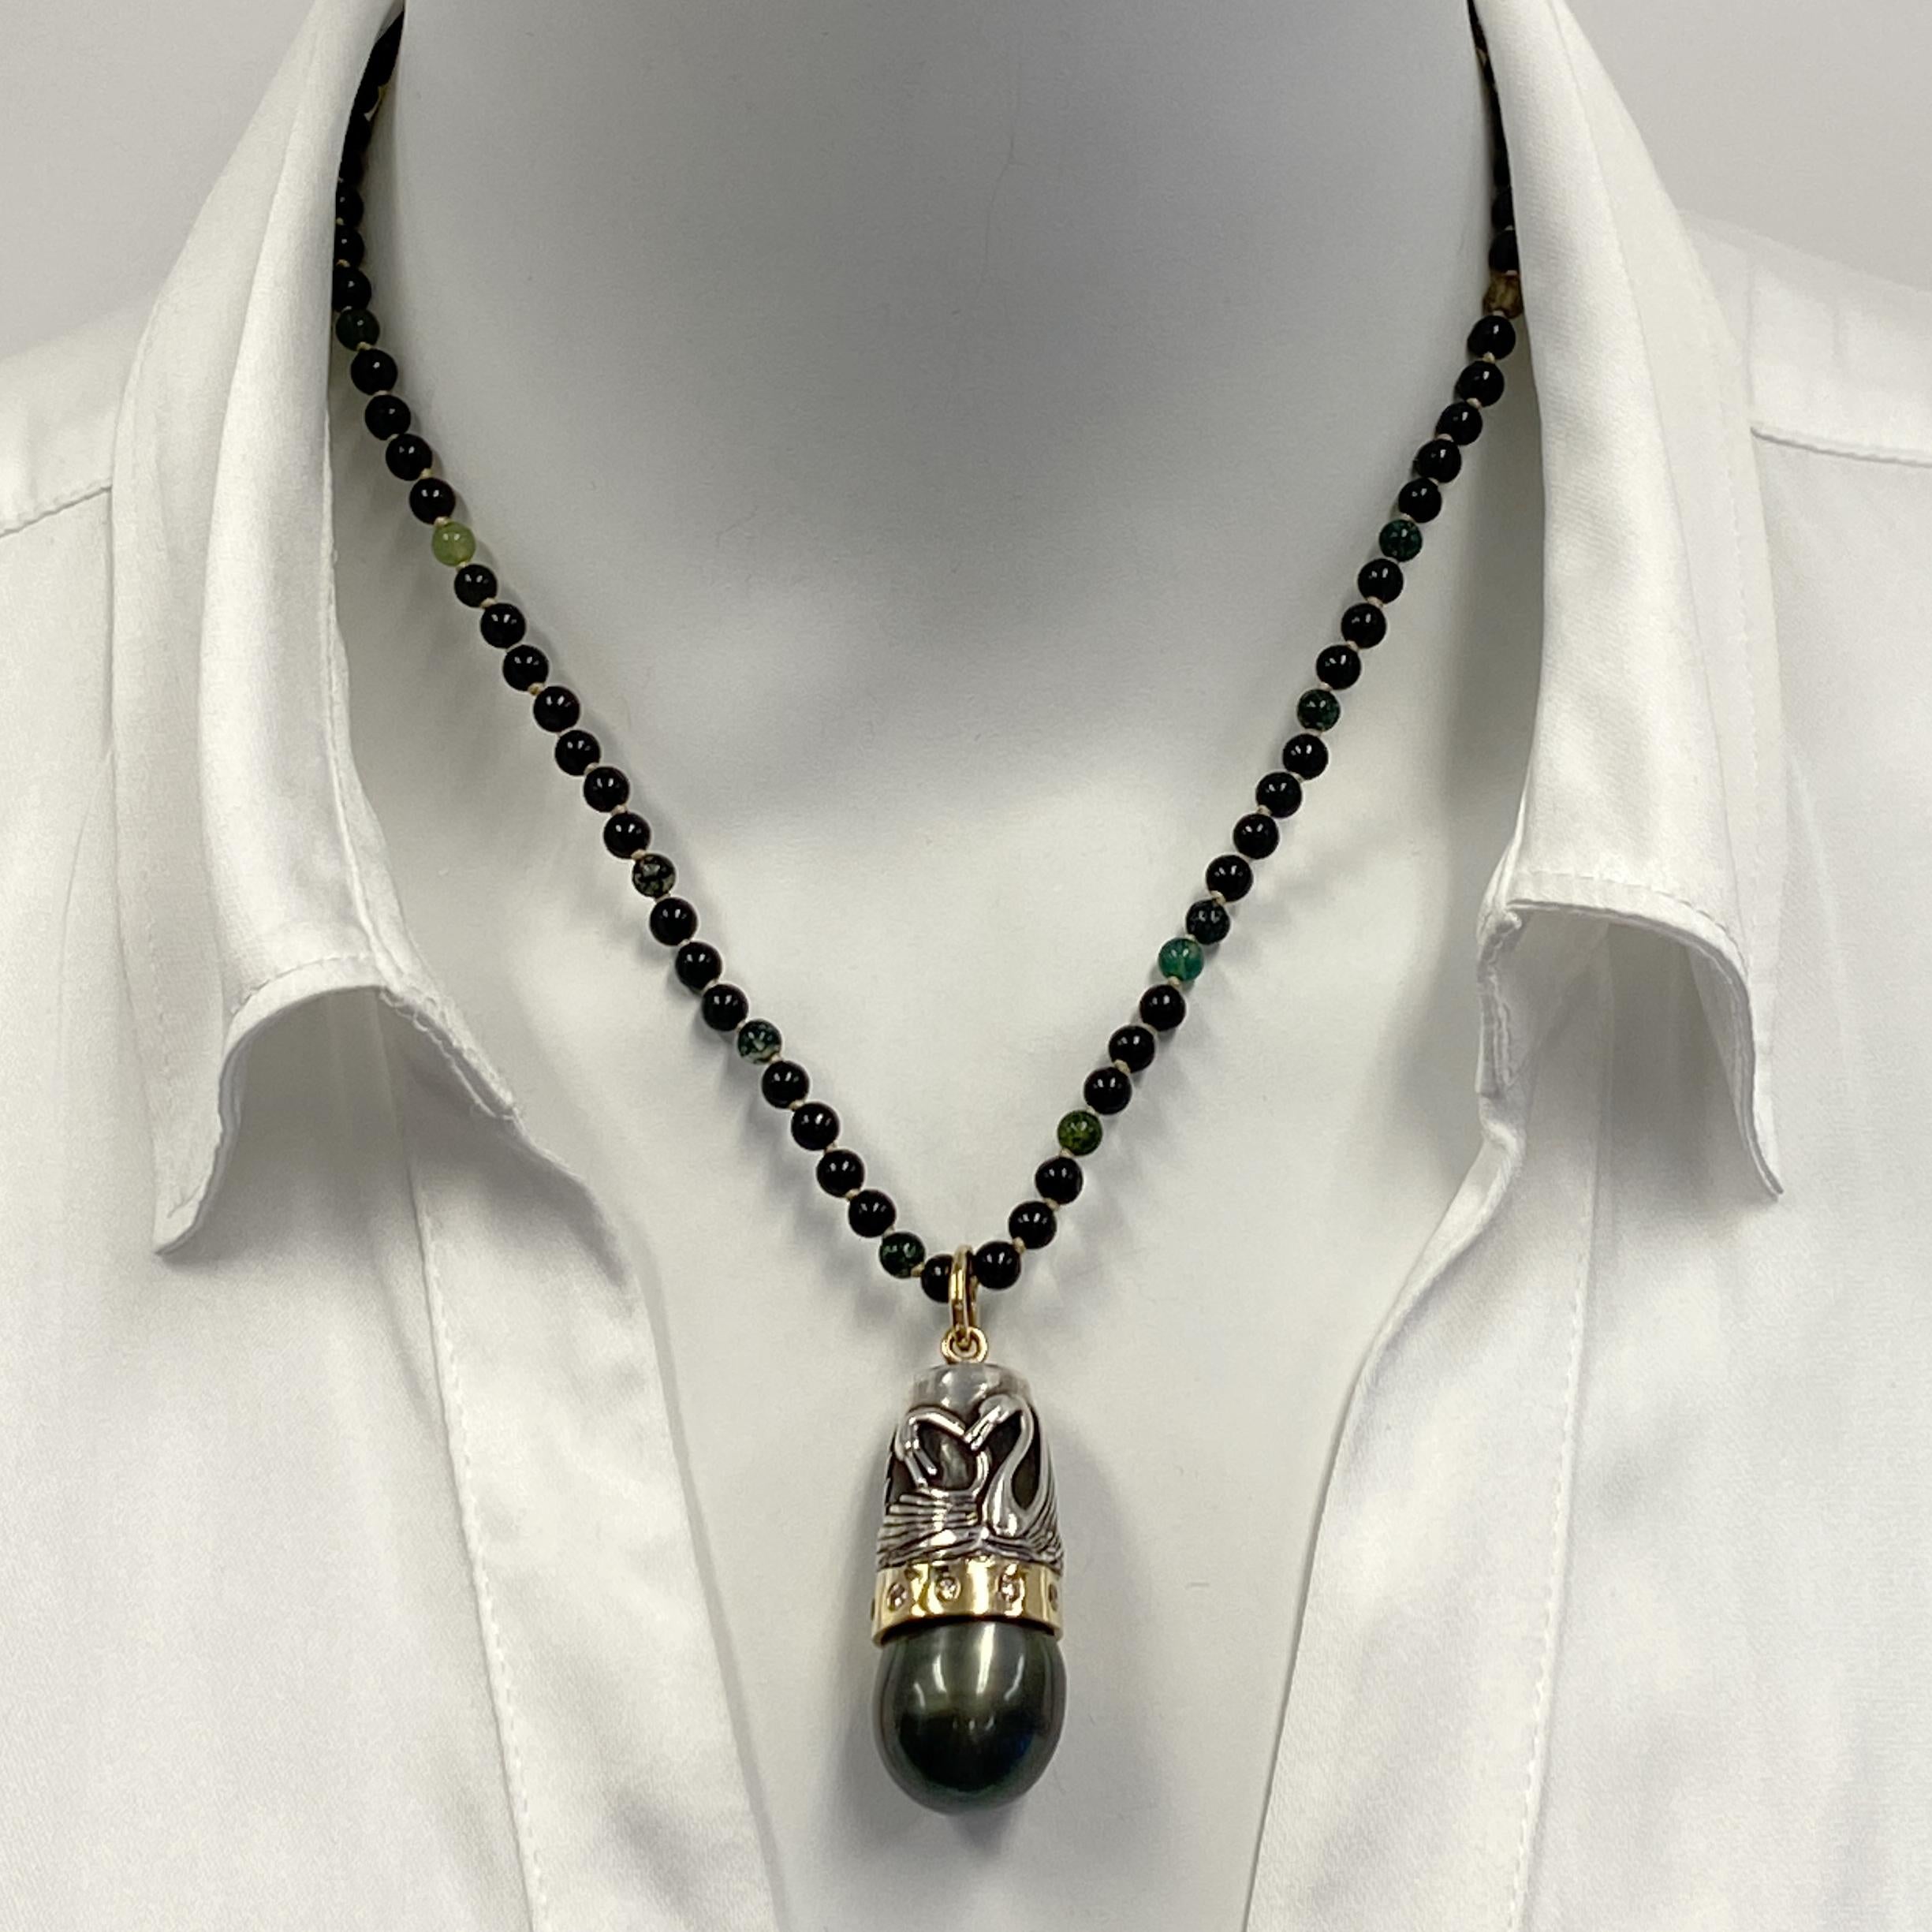 This one-of-a-kind pendant by Eytan Brandes features a huge Tahitian black pearl set in an 18 karat yellow gold bezel burnished with pale brown diamonds.  Topping the bezel is a vintage sterling silver thimble featuring two pairs of loving swans